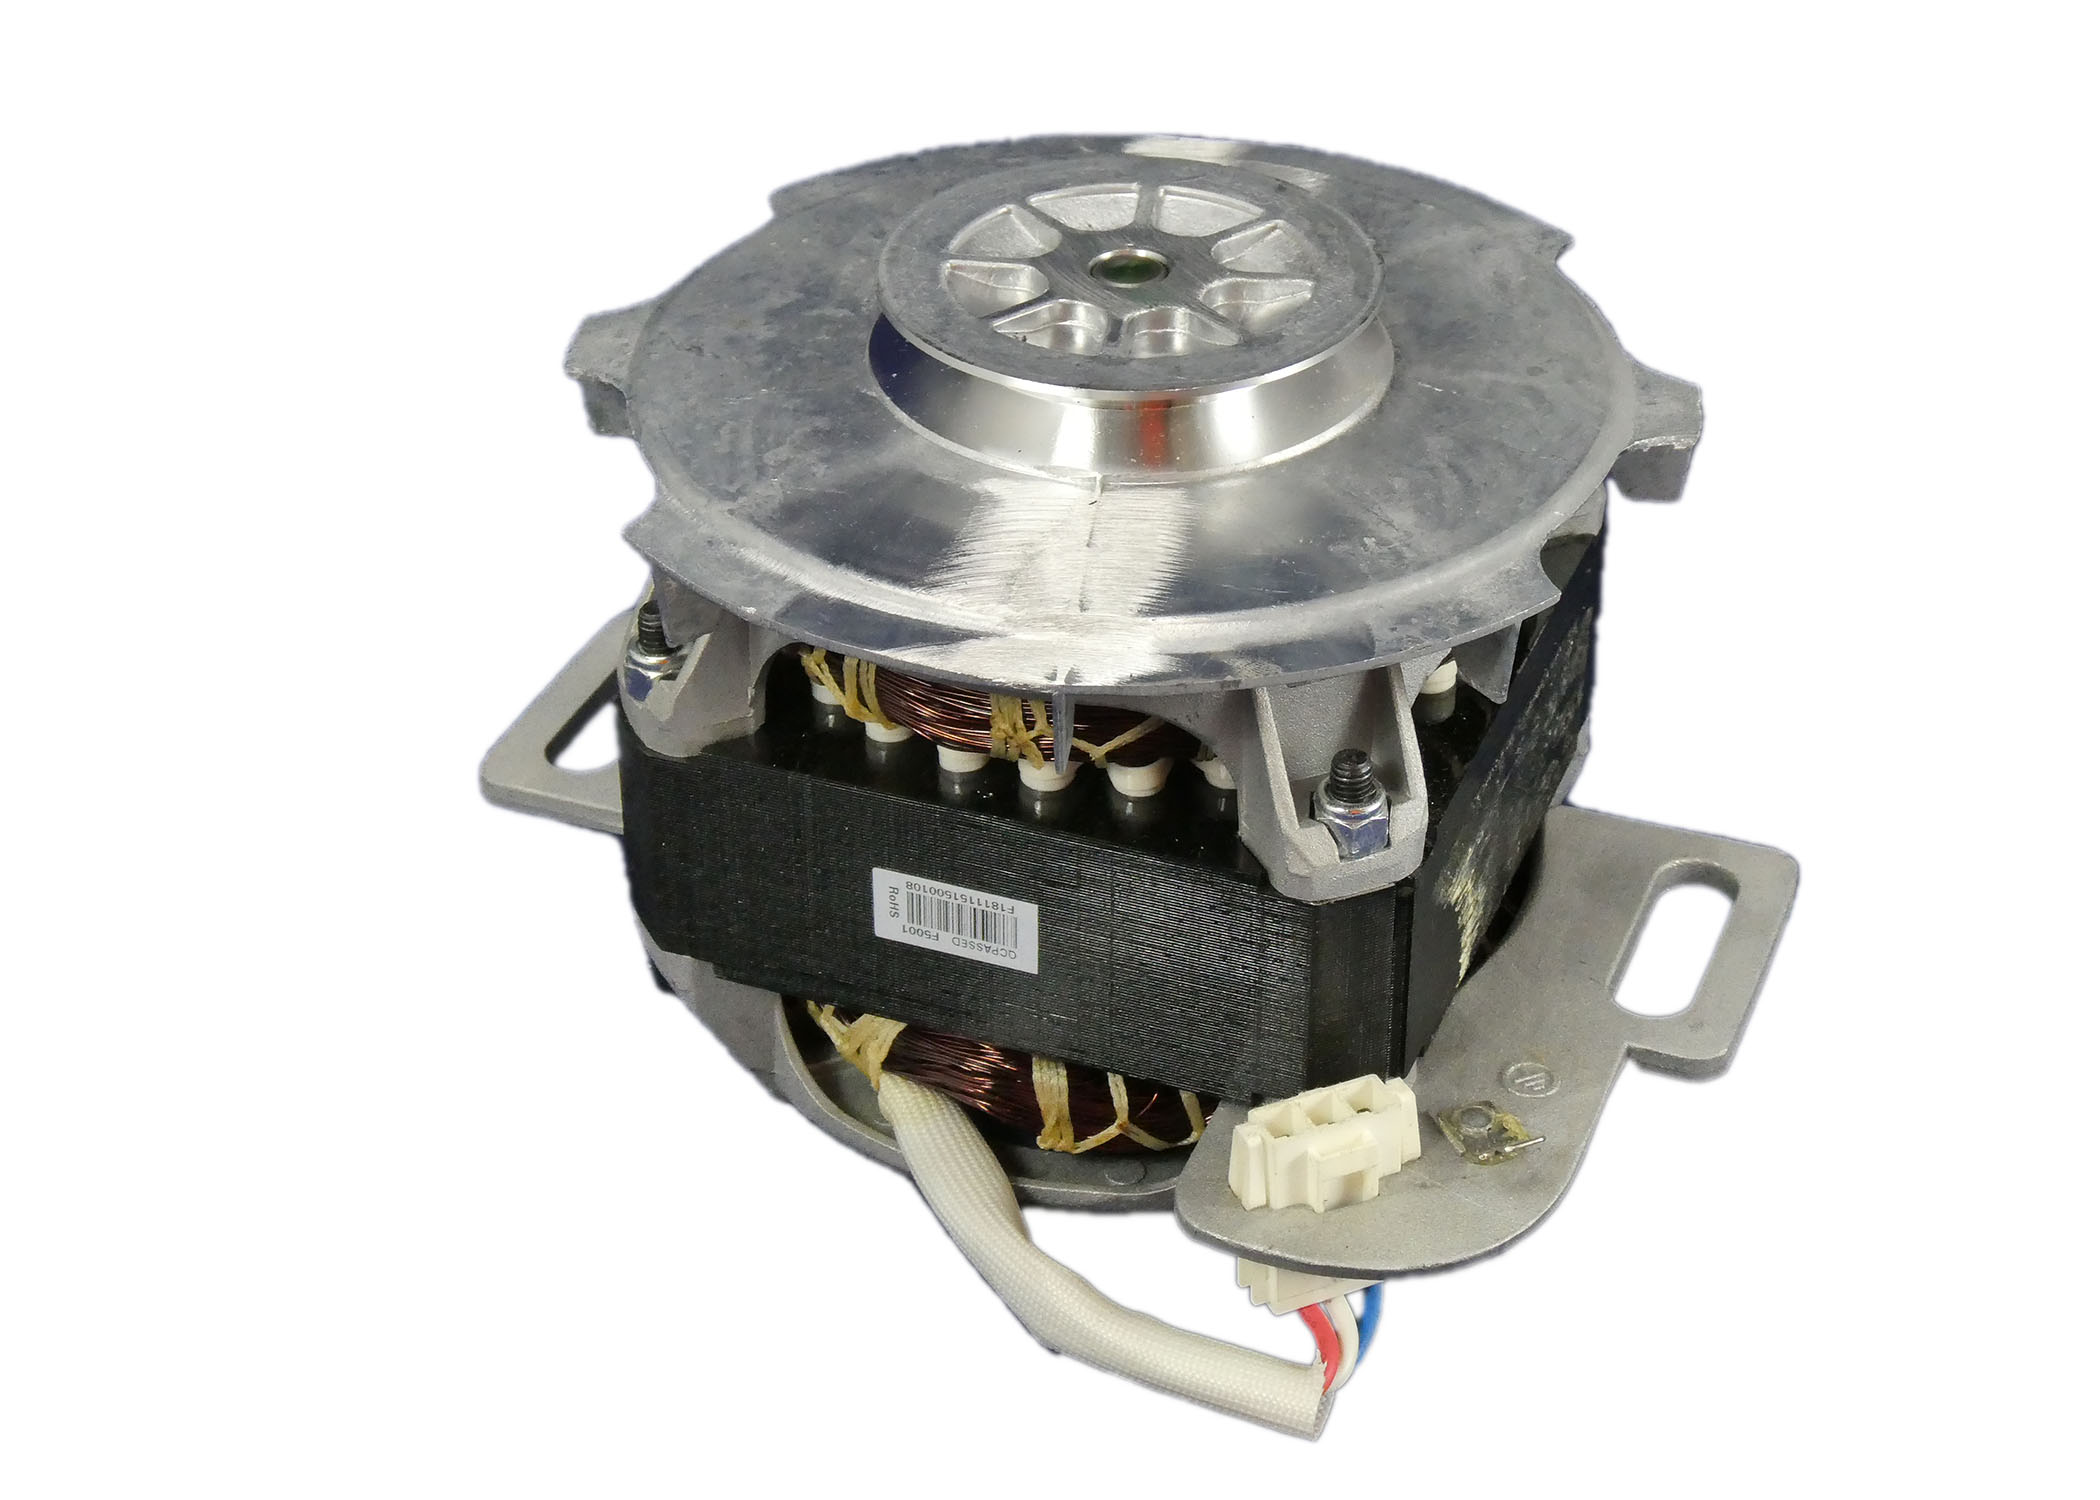 /globalassets/images/spares-images/a00181302_motor--pulley-assembly_laundry_motors-pumps--fans.jpg